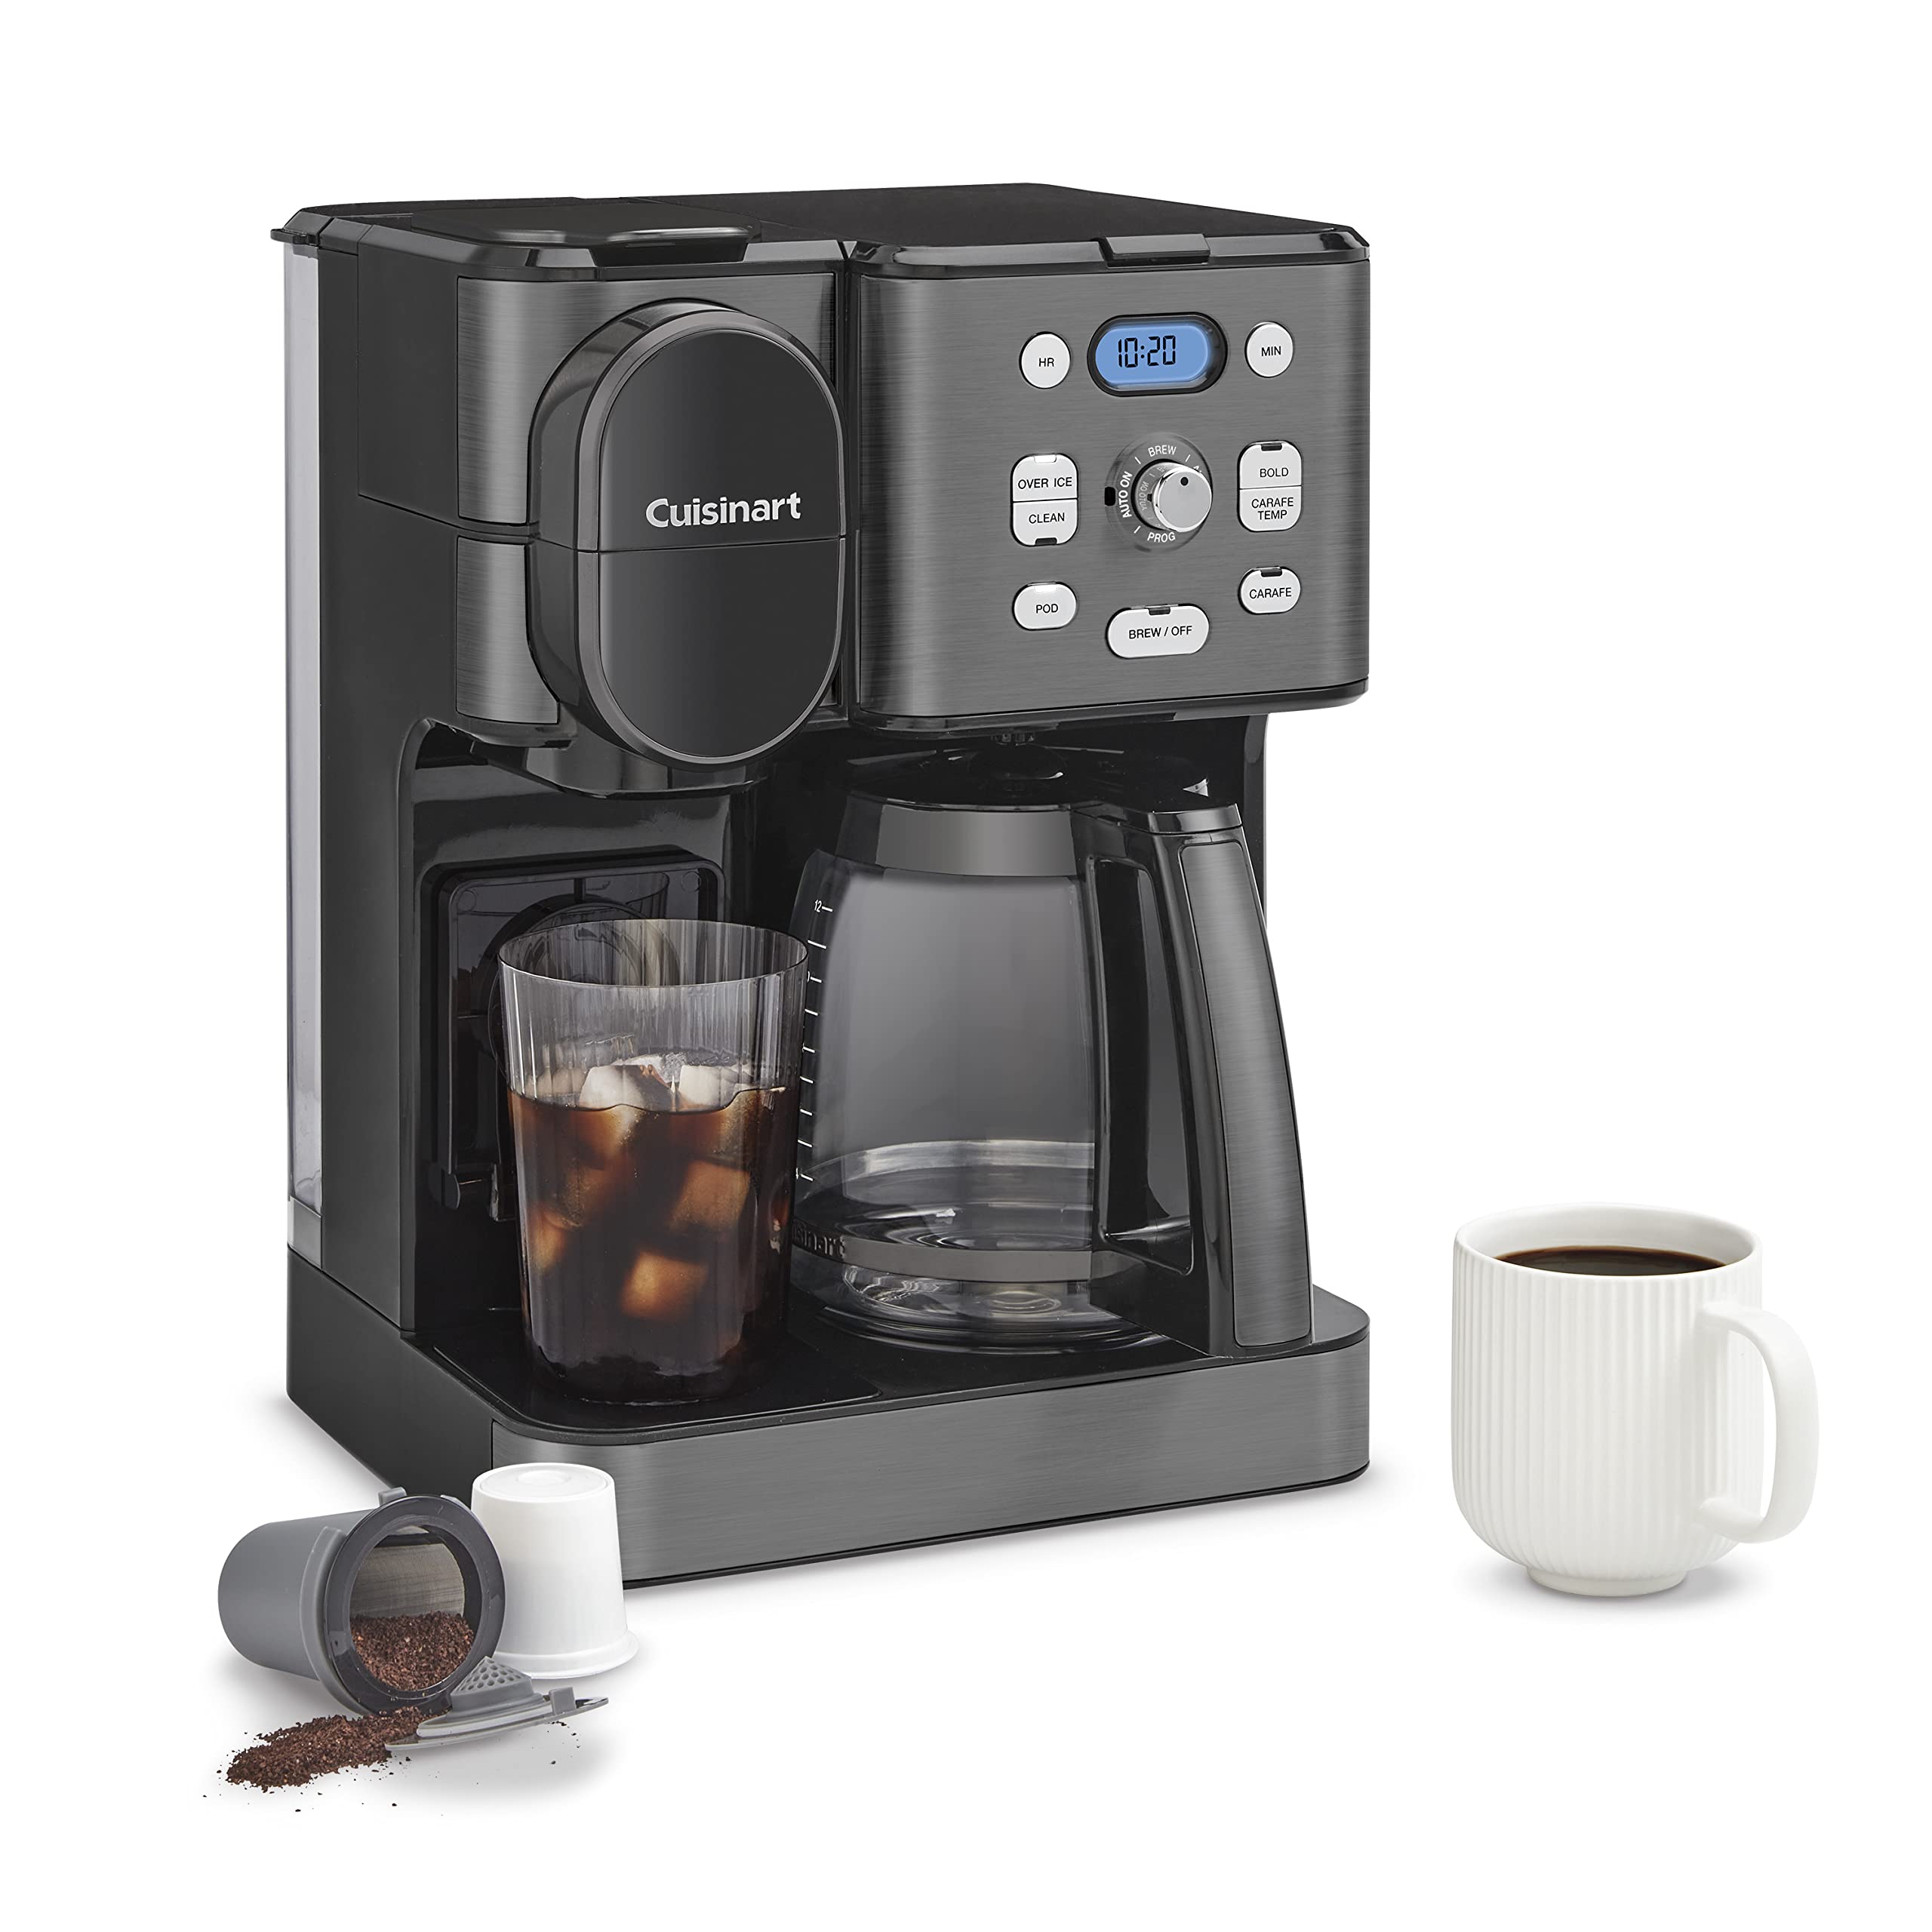 Cuisinart Coffee Maker, 12-Cup Glass Carafe, Automatic Hot & Iced Coffee Maker, Single Server Brewer, Stainless Steel, SS-16BKS